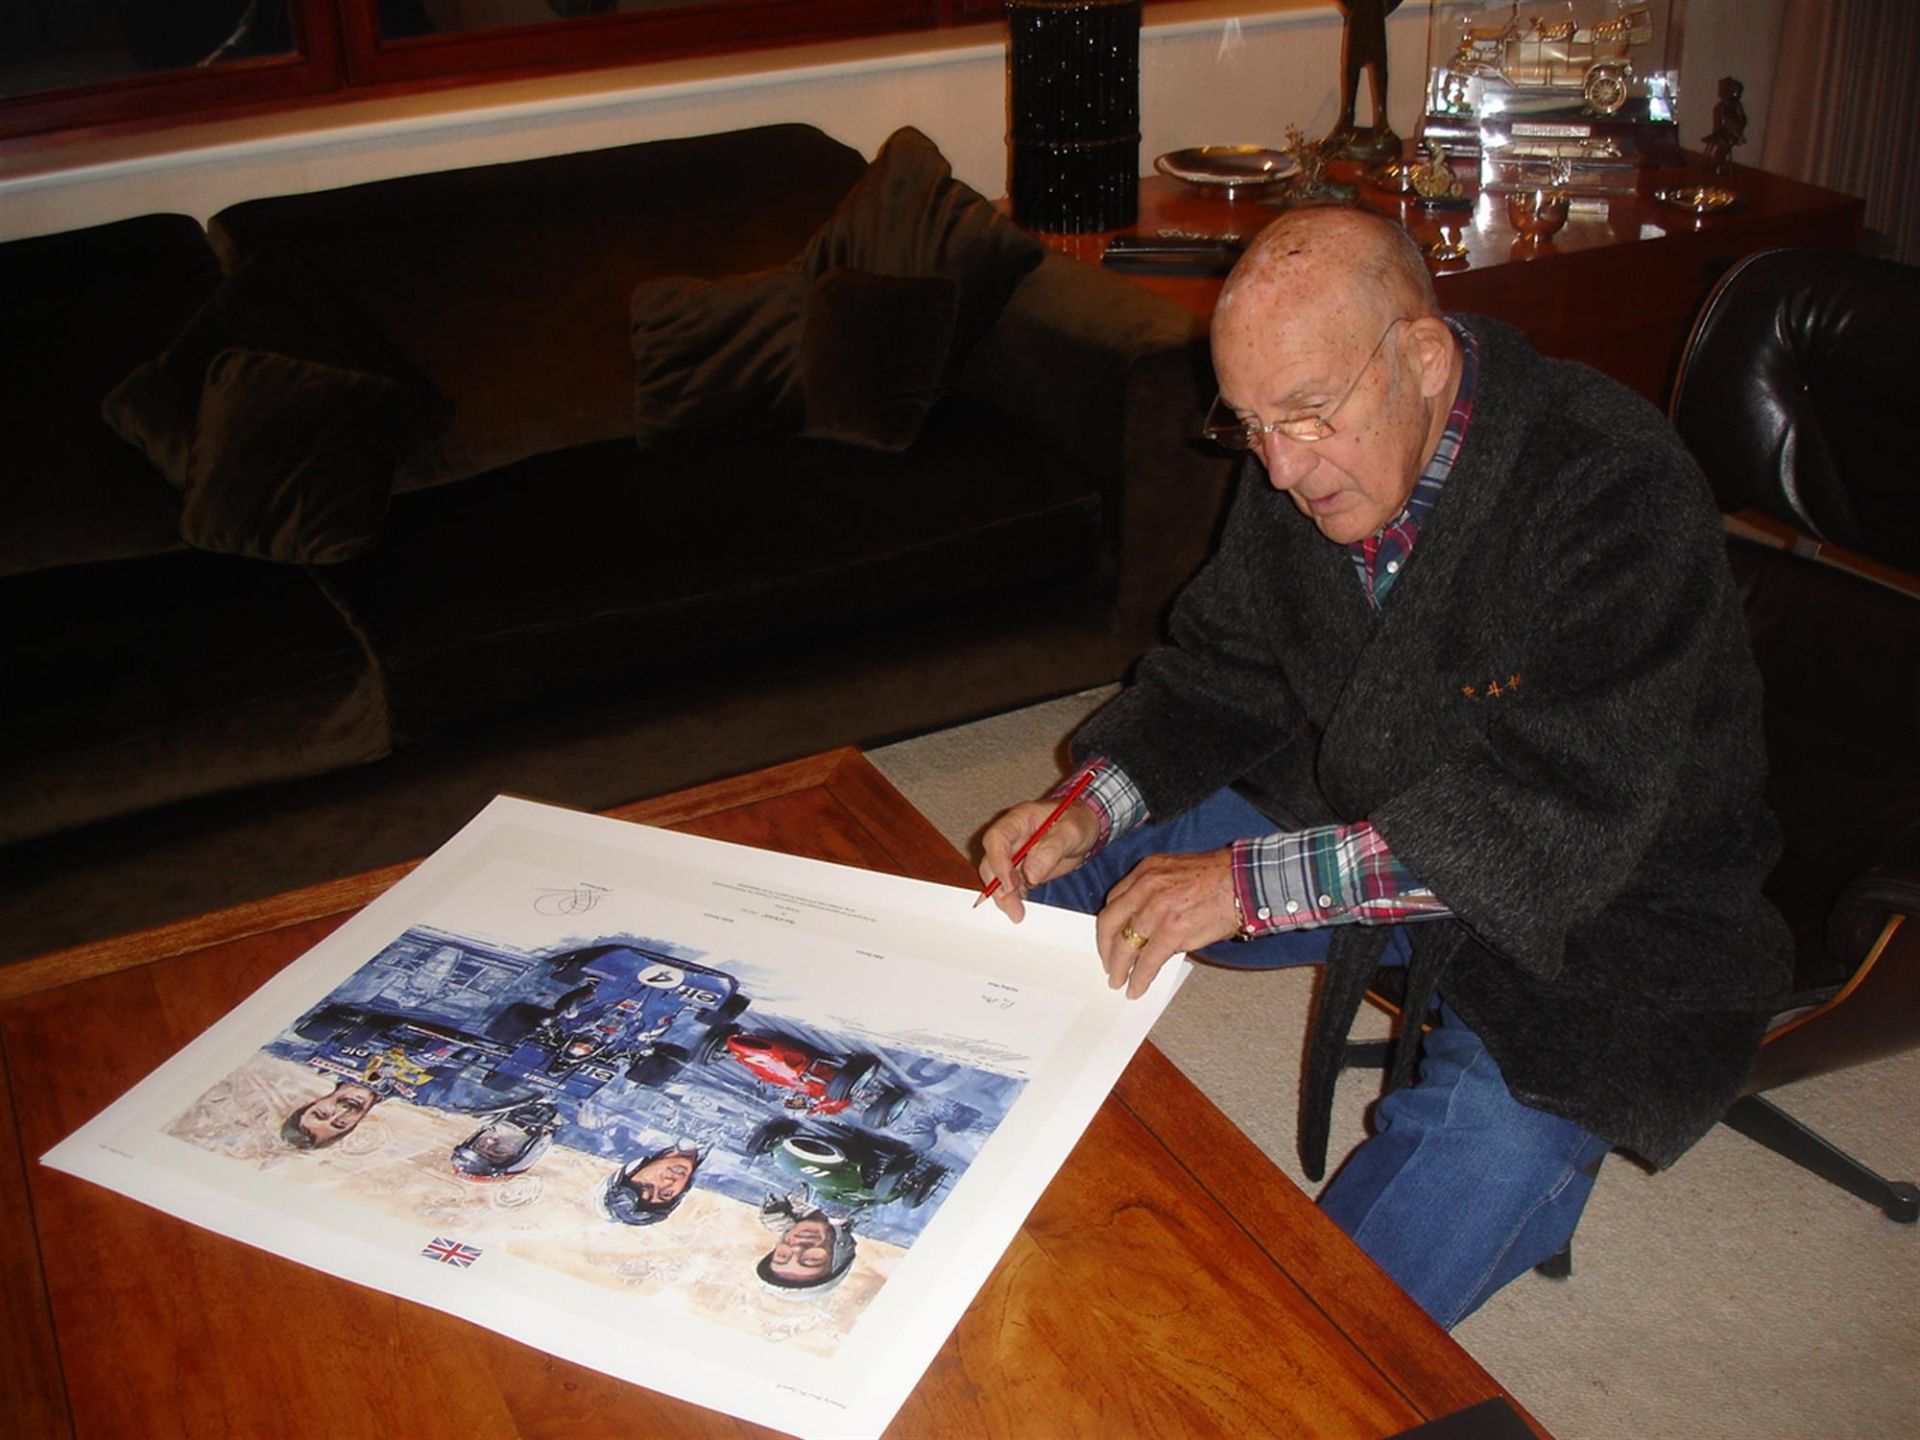 Best of British Original Artwork Signed by Moss, Mansell, Stewart and Surtees by Nicholas Watts - Image 3 of 5